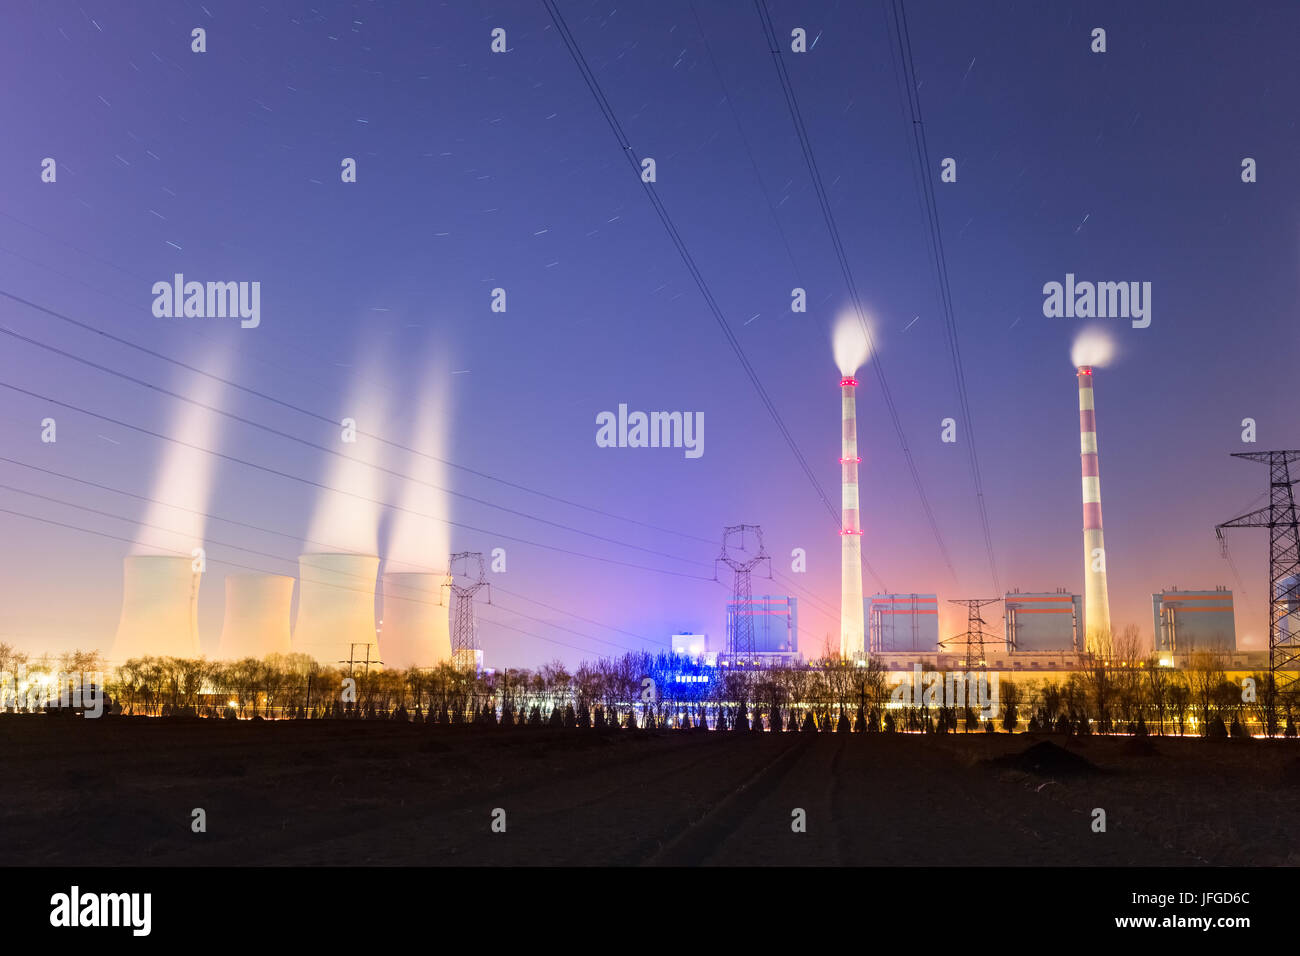 modern thermal power plant at night Stock Photo